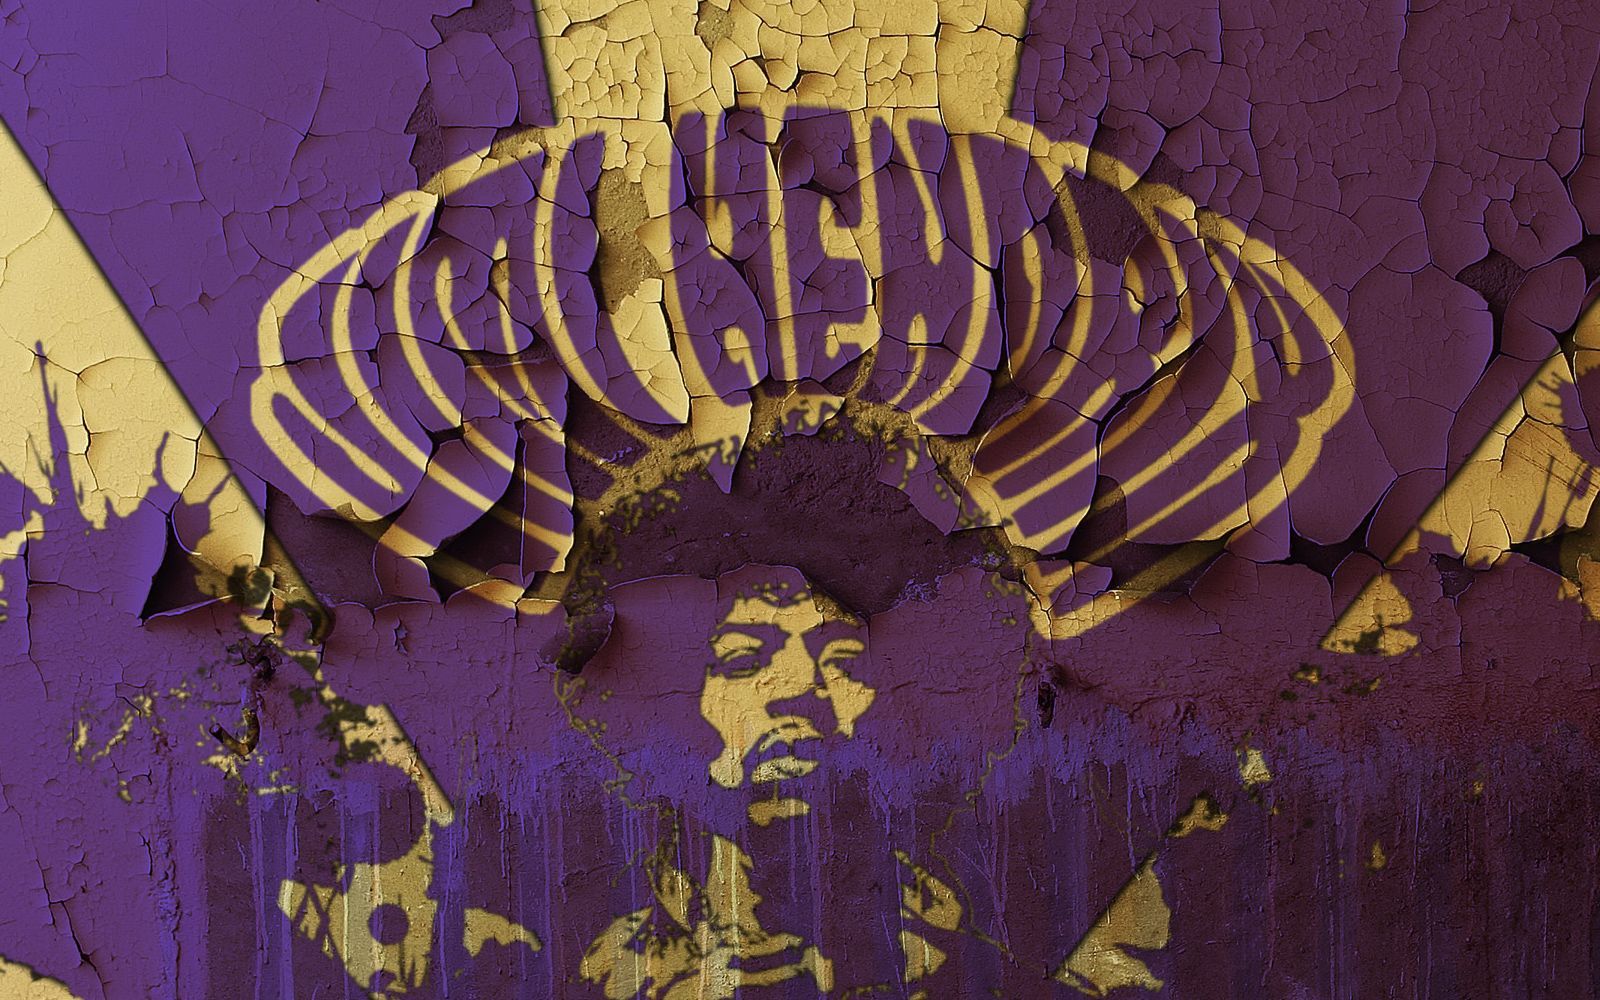 Jimi Hendrix HD Wallpapers and Backgrounds